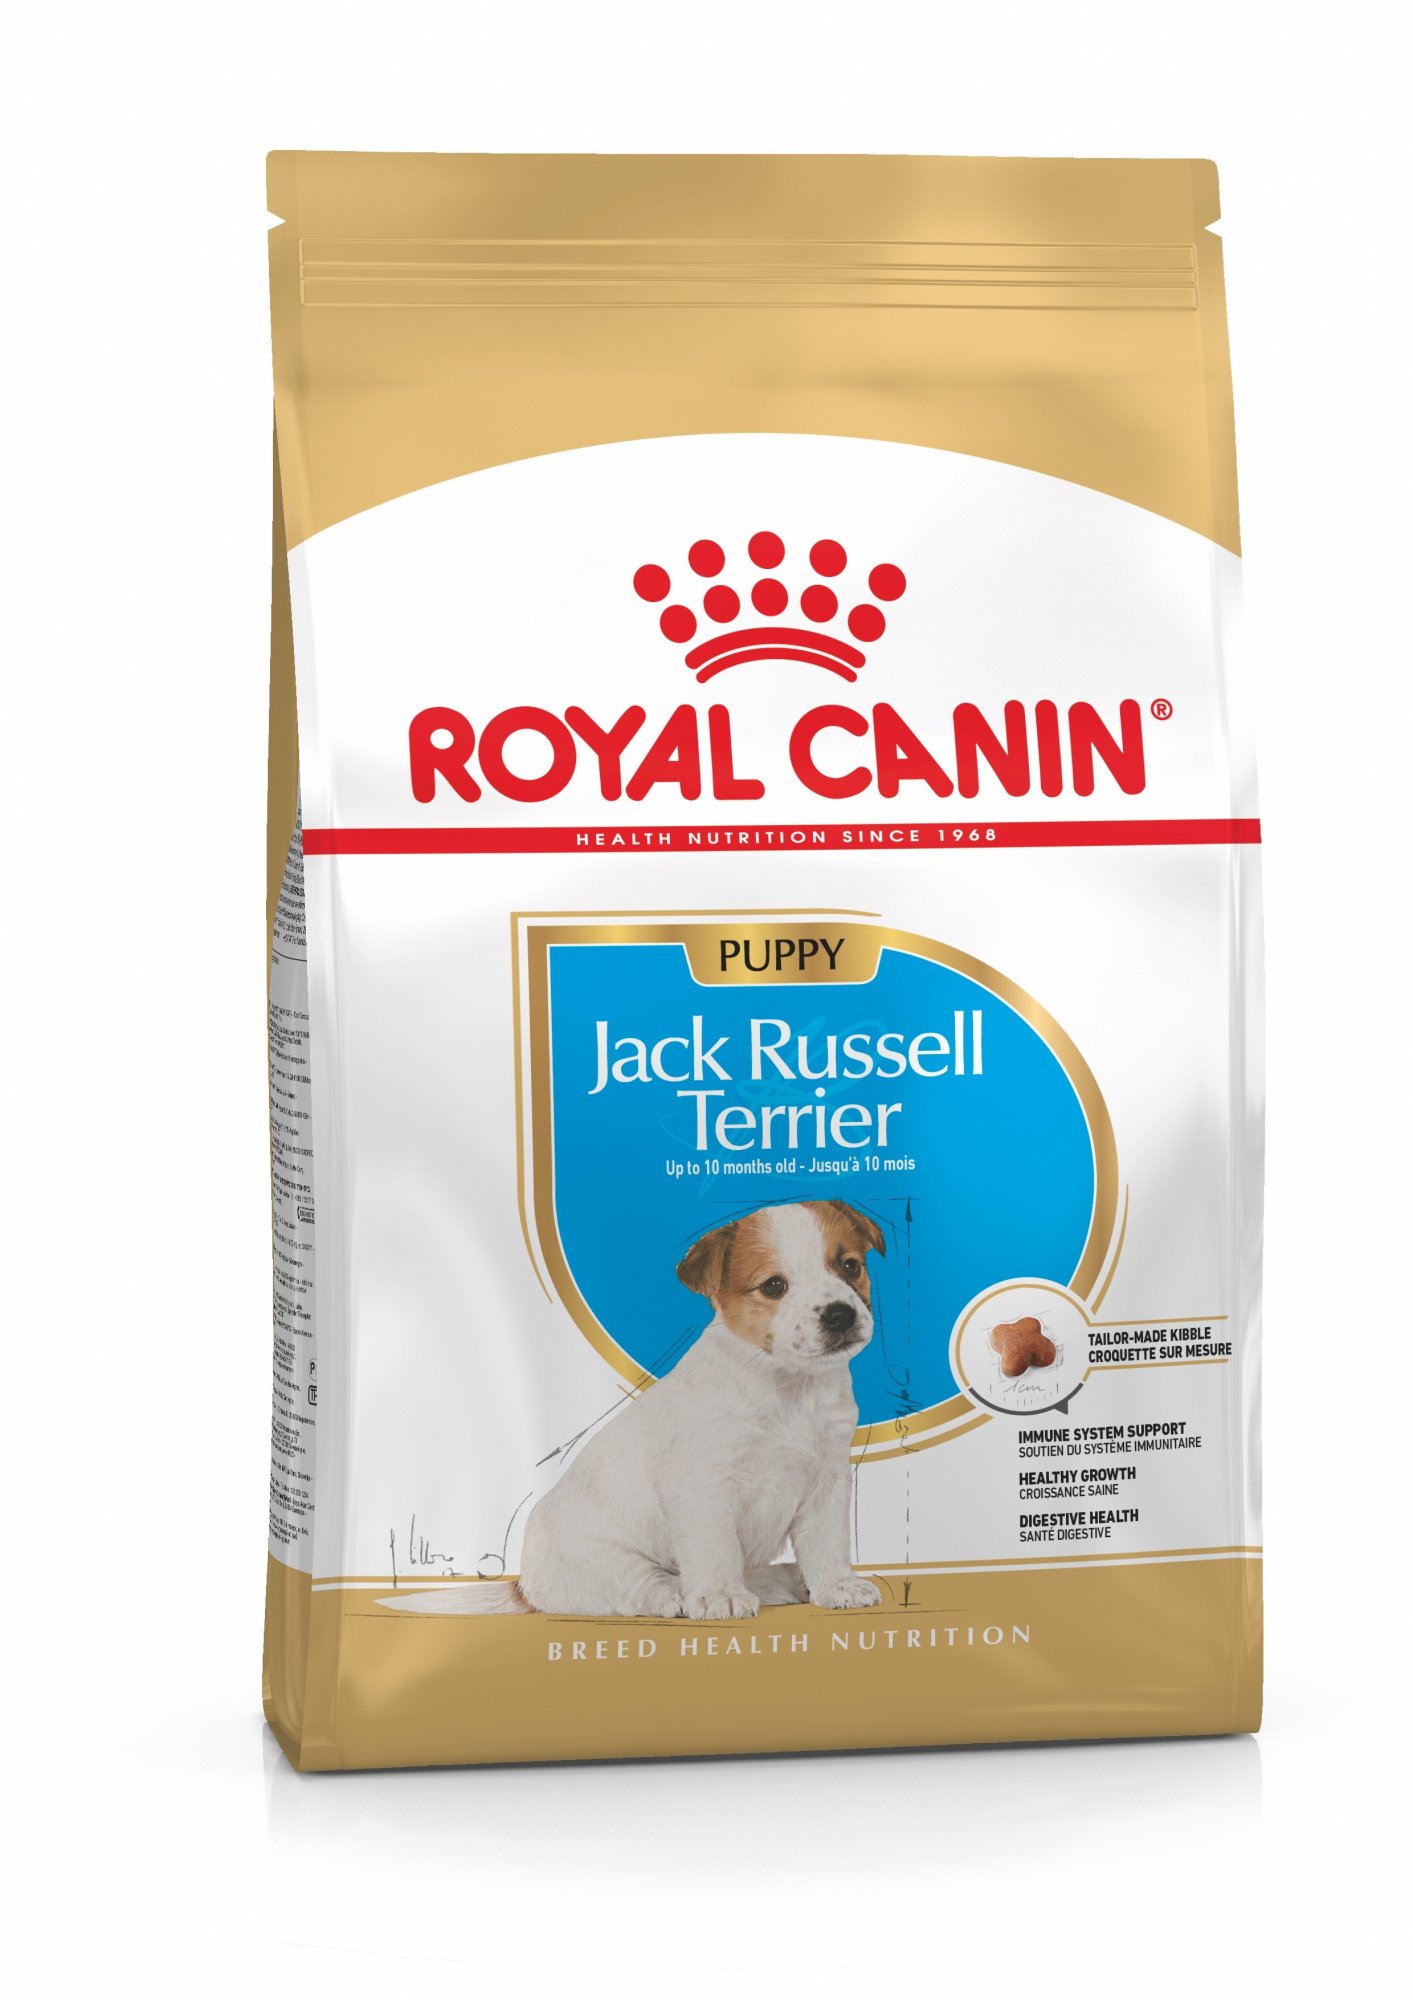 Royal Canin Breed Puppy Jack Russell